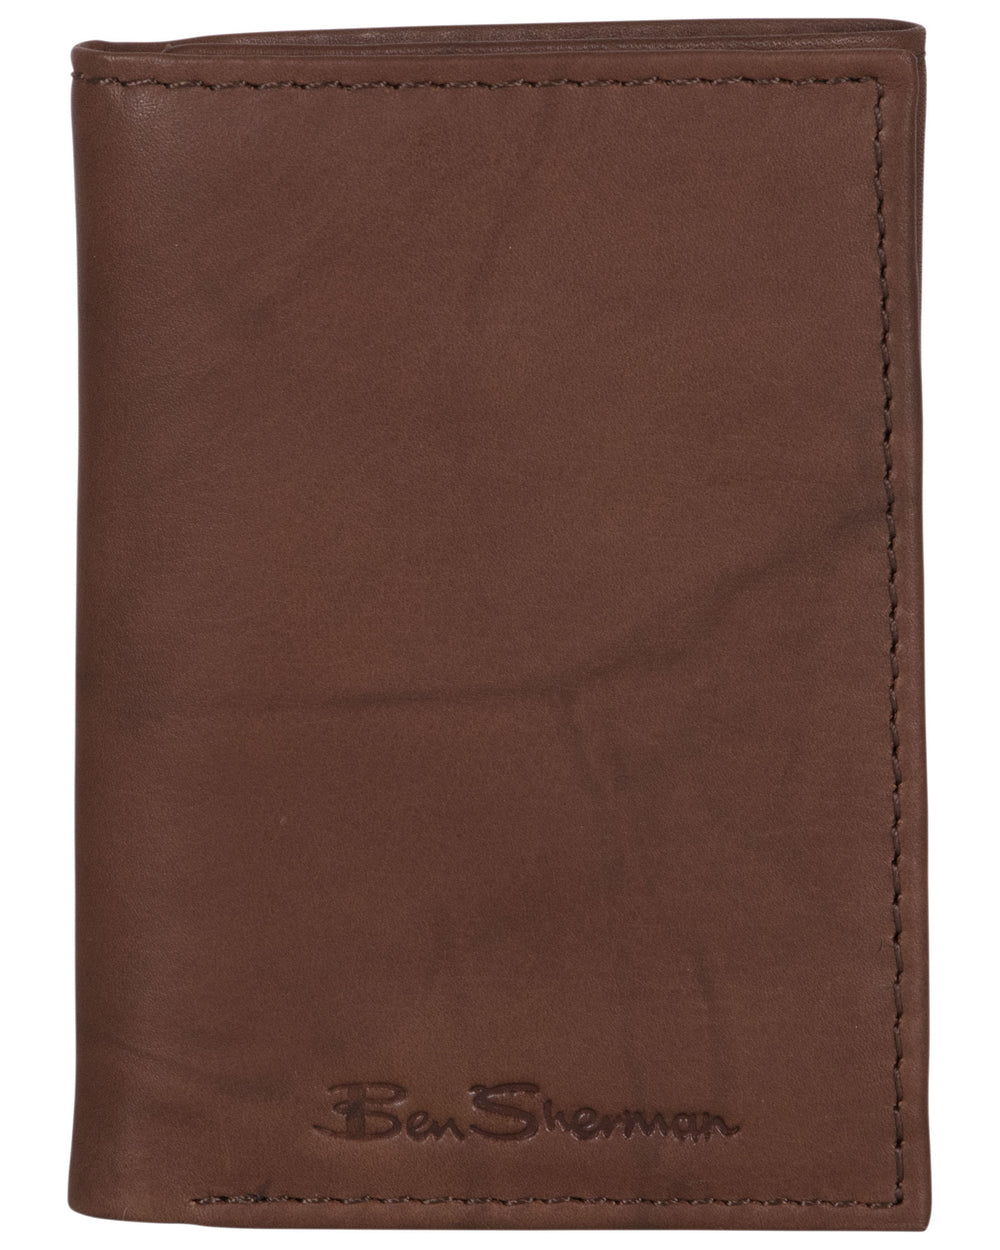 Manchester Marble Crunch Leather Trifold Wallet - Brown